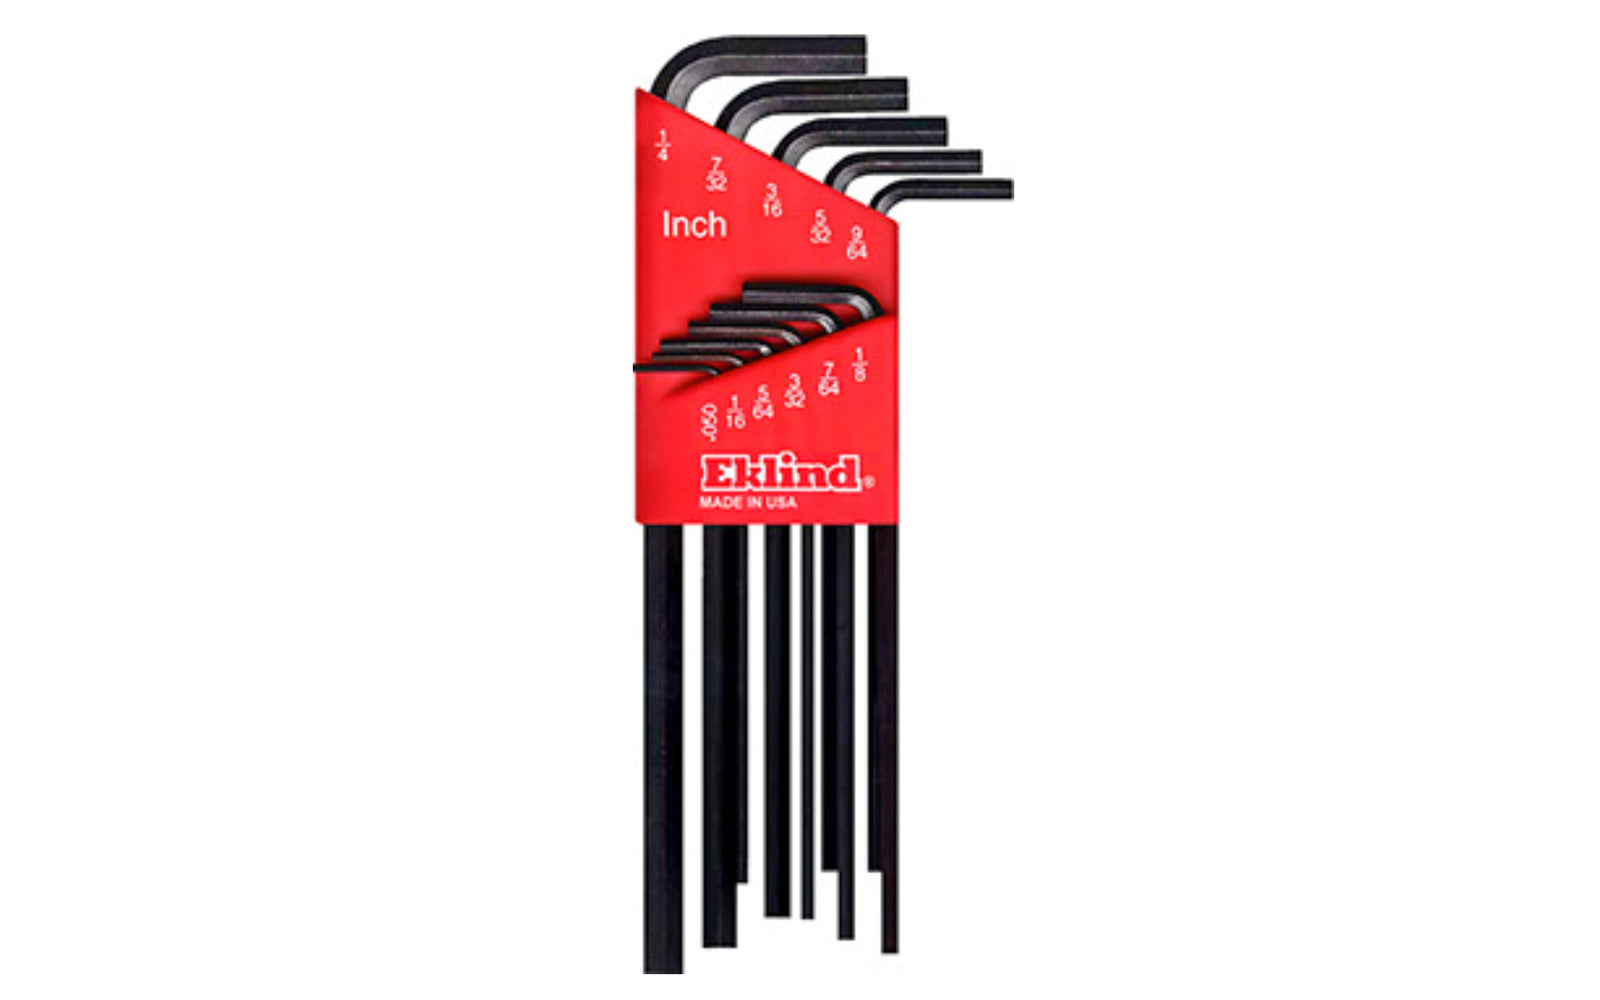 Eklind 11-PC Long Hex-L Wrench Key Set - SAE. .050", 1/16", 5/64", 3/32", 7/64",  1/8", 9/64", 5/32", 3/16", 7/32", & 1/4" sizes. Allen wrench set is hardened, tempered & finished with Eklind black finish to resist rust. Plastic holder firmly retains each key. Eklind model 10211. Made in USA.